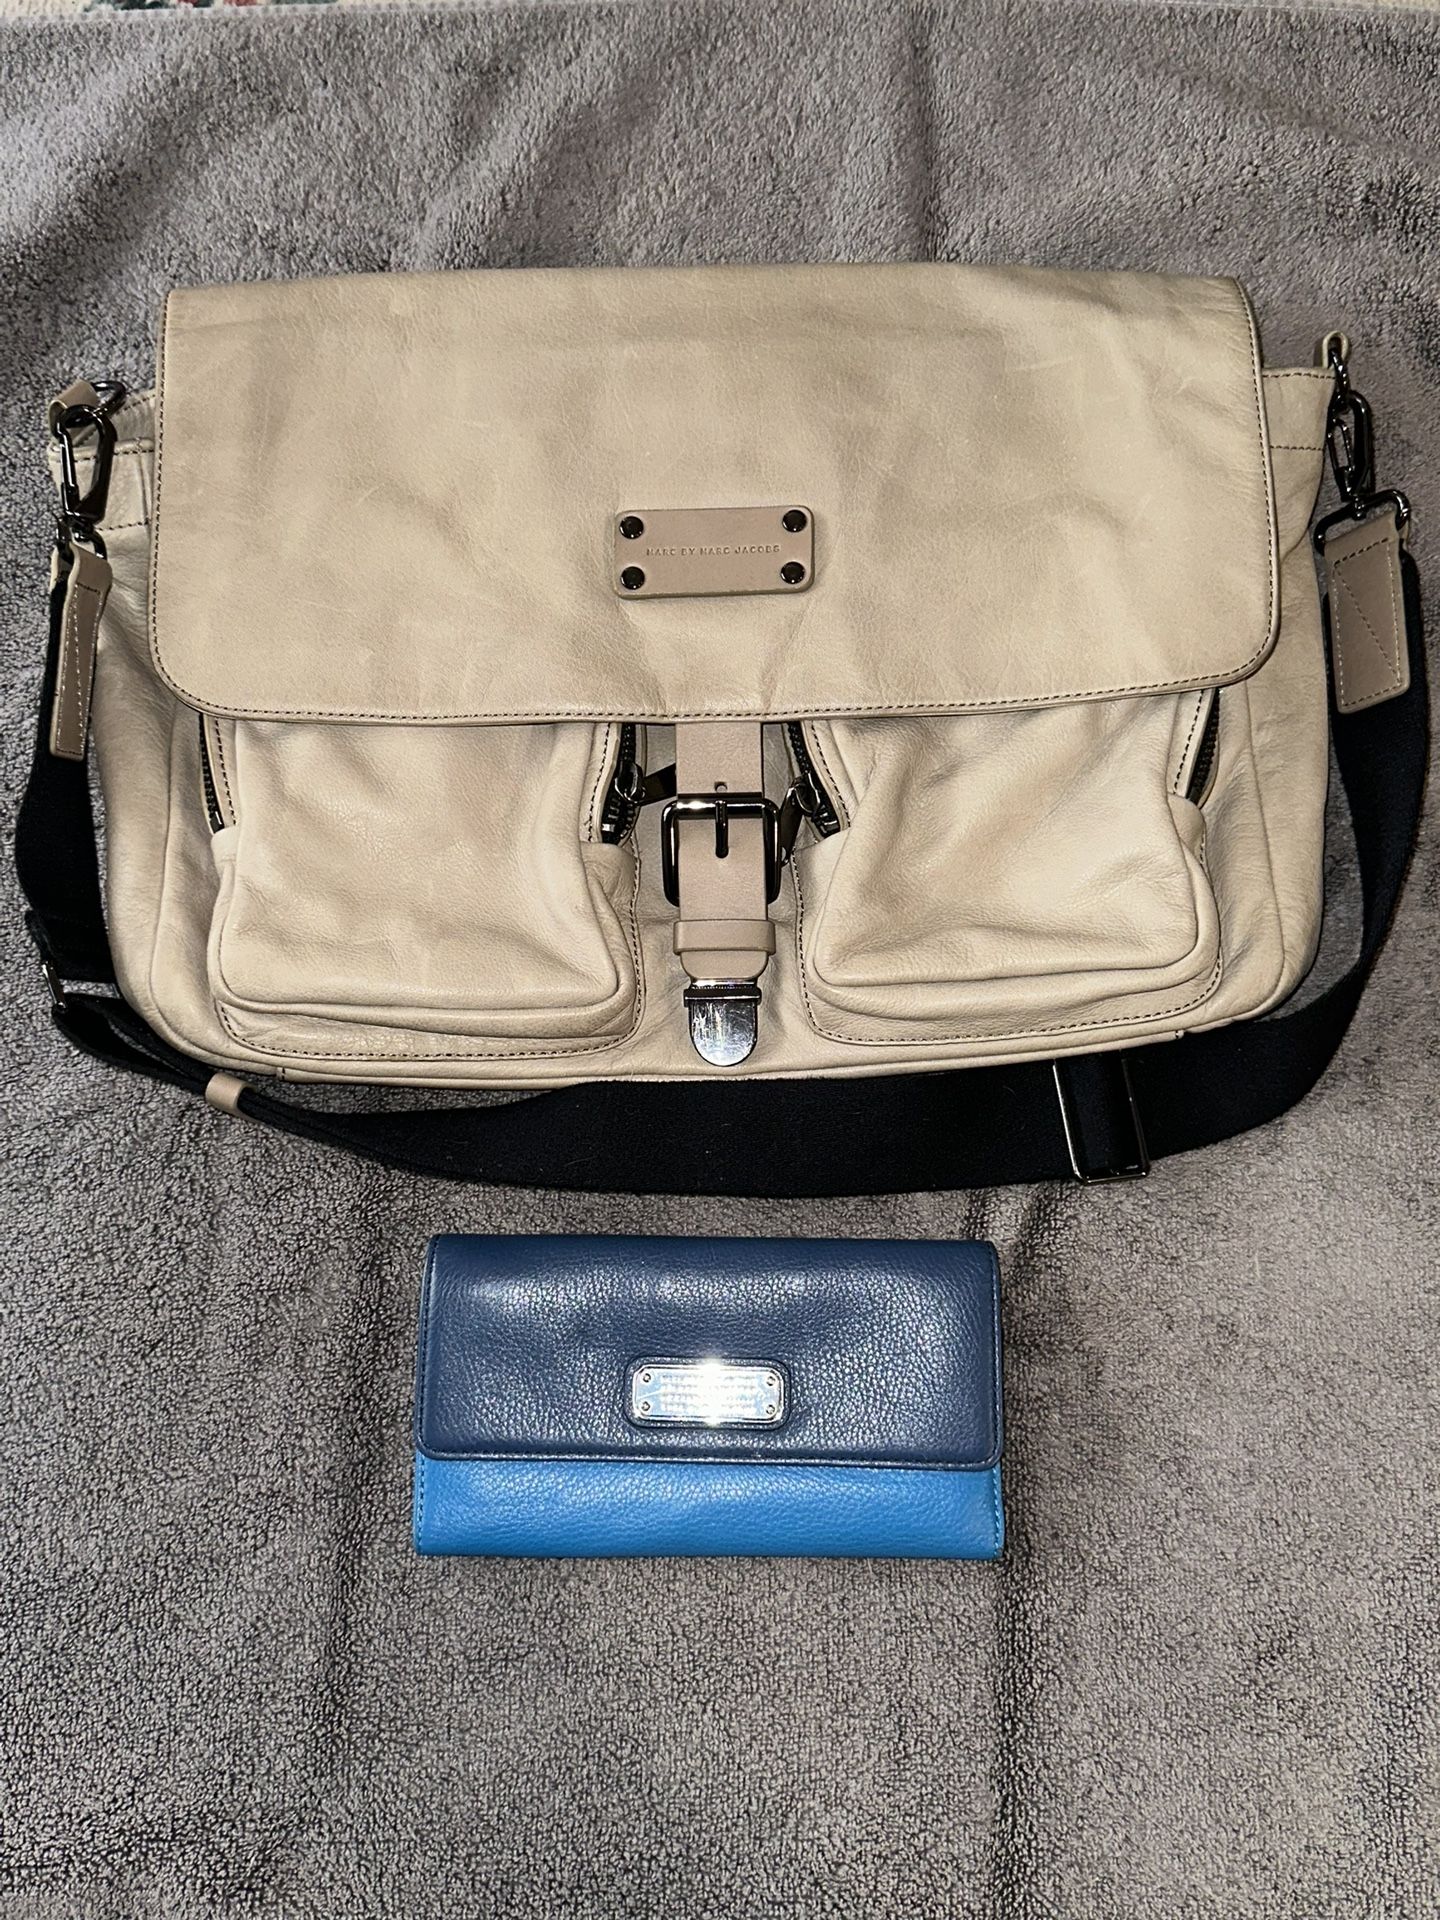 Marc by Marc Jacobs bag and wallet